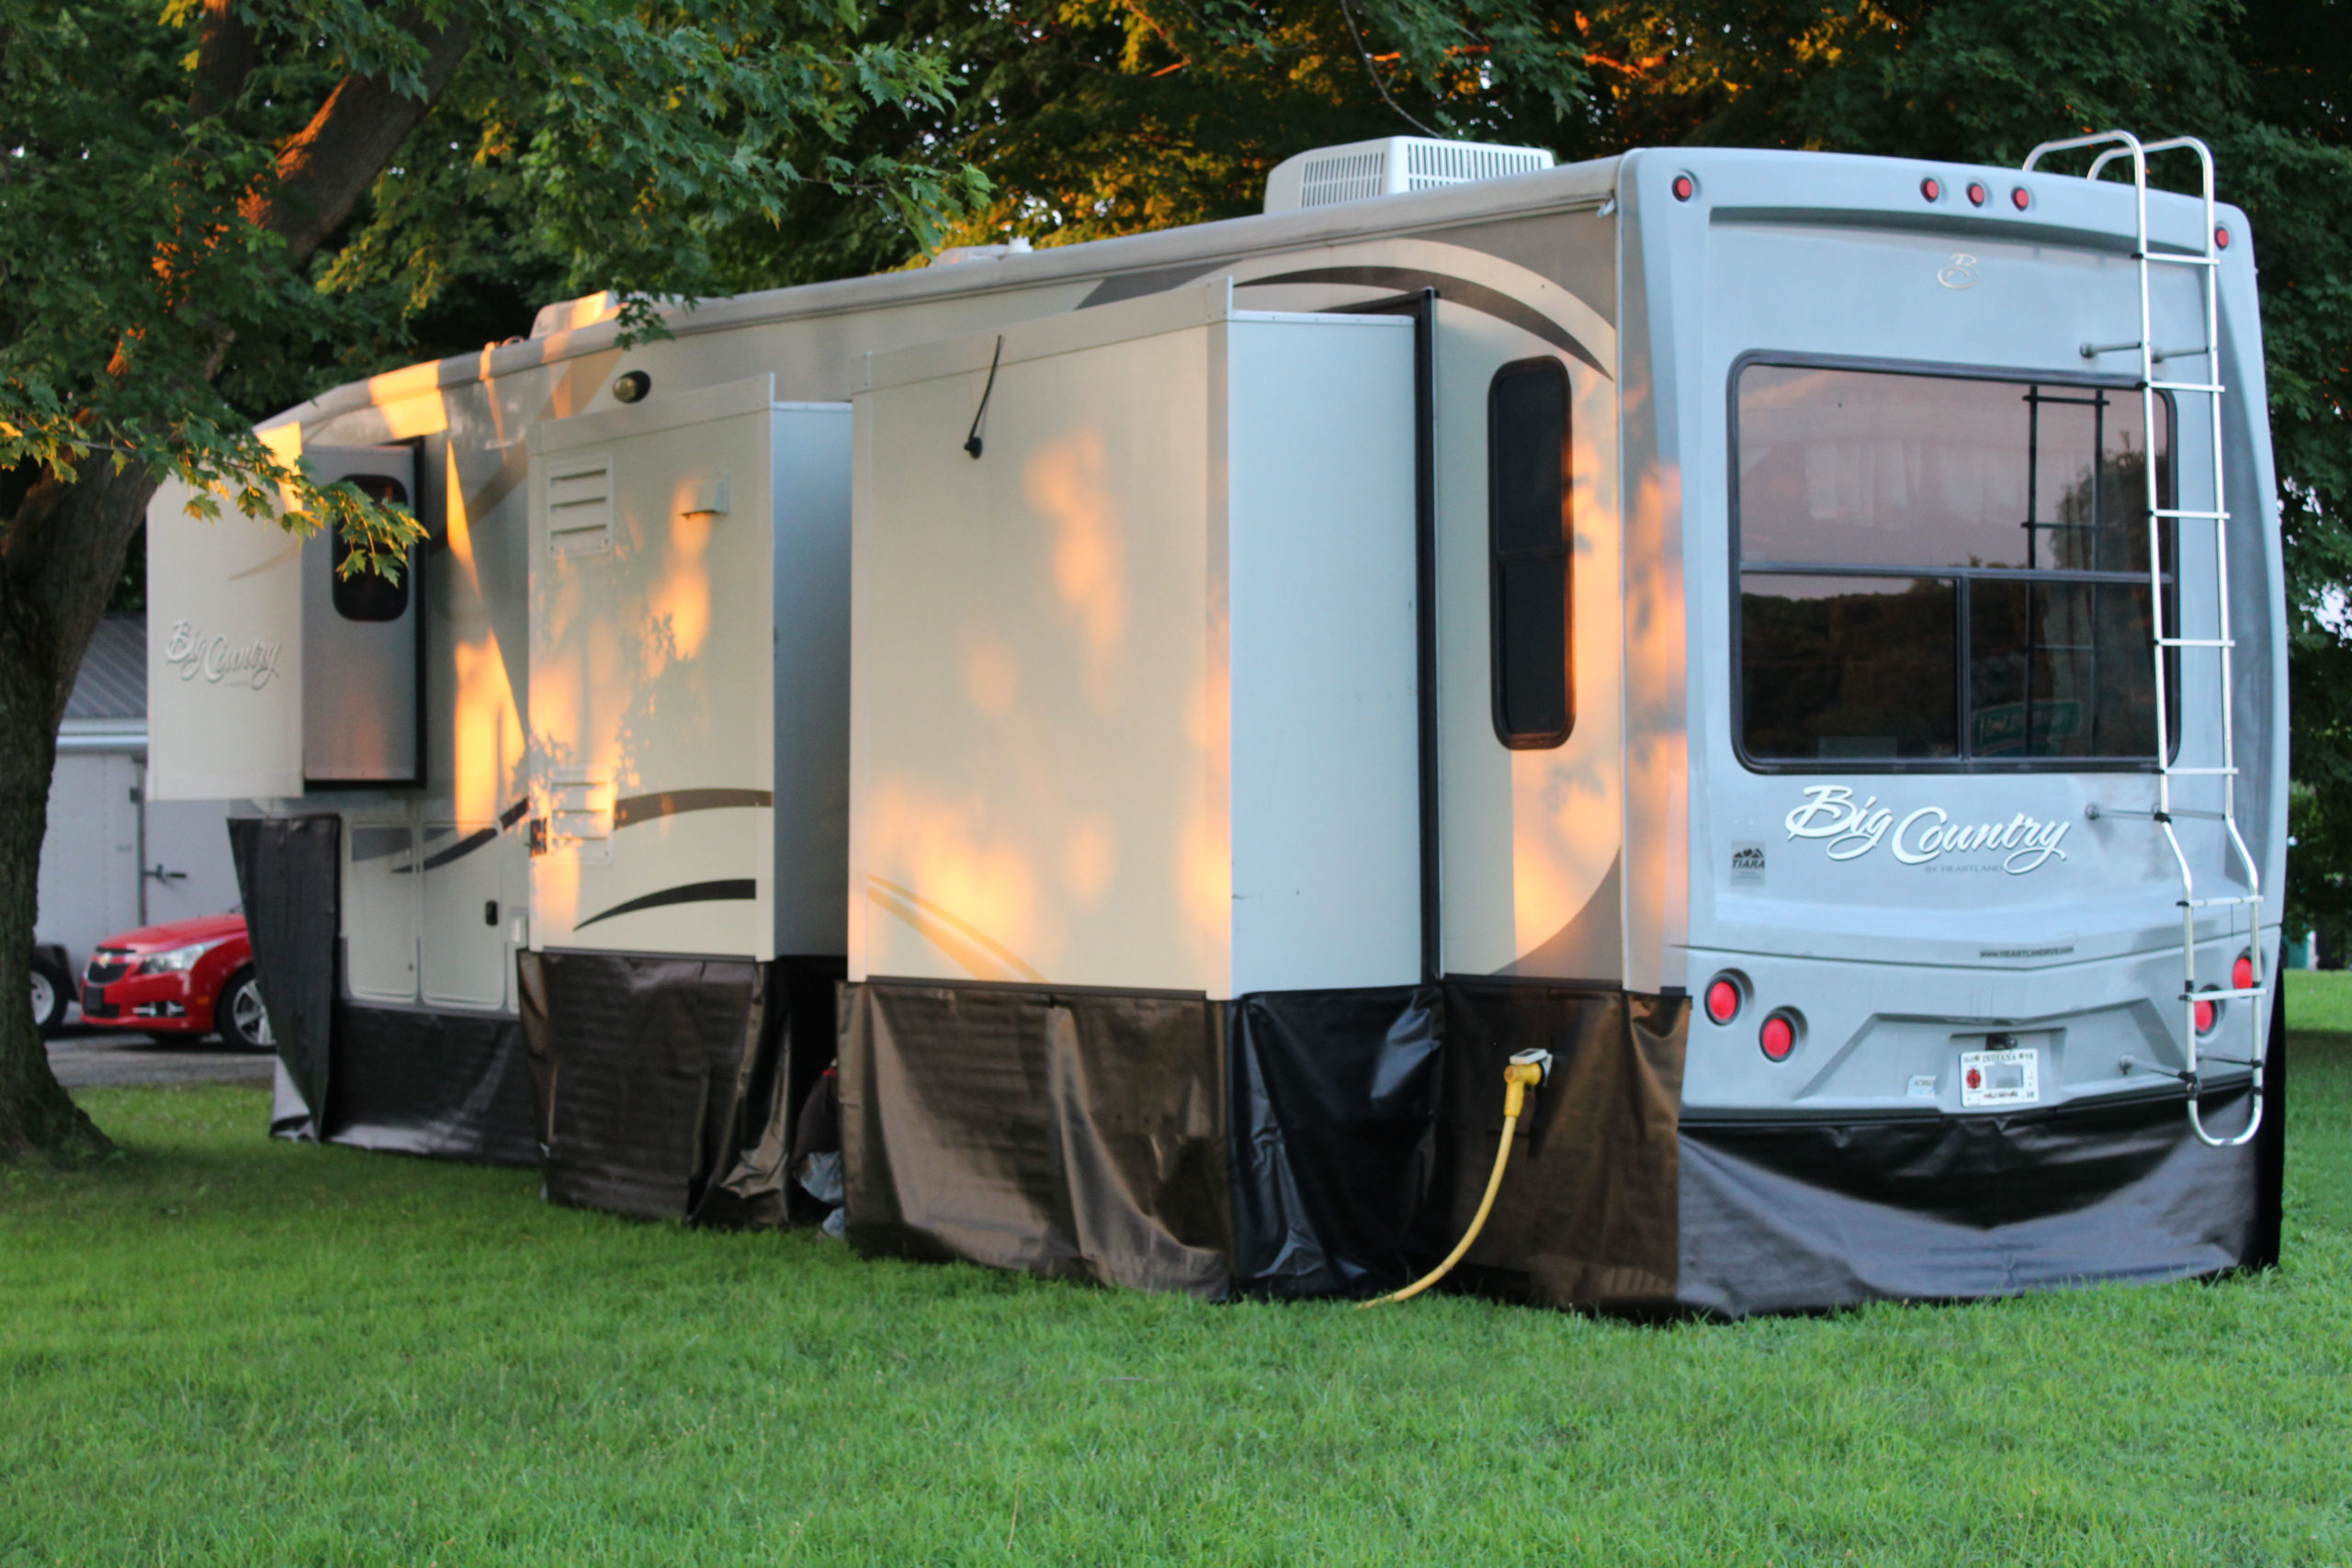 RV Skirting in Warm Weather